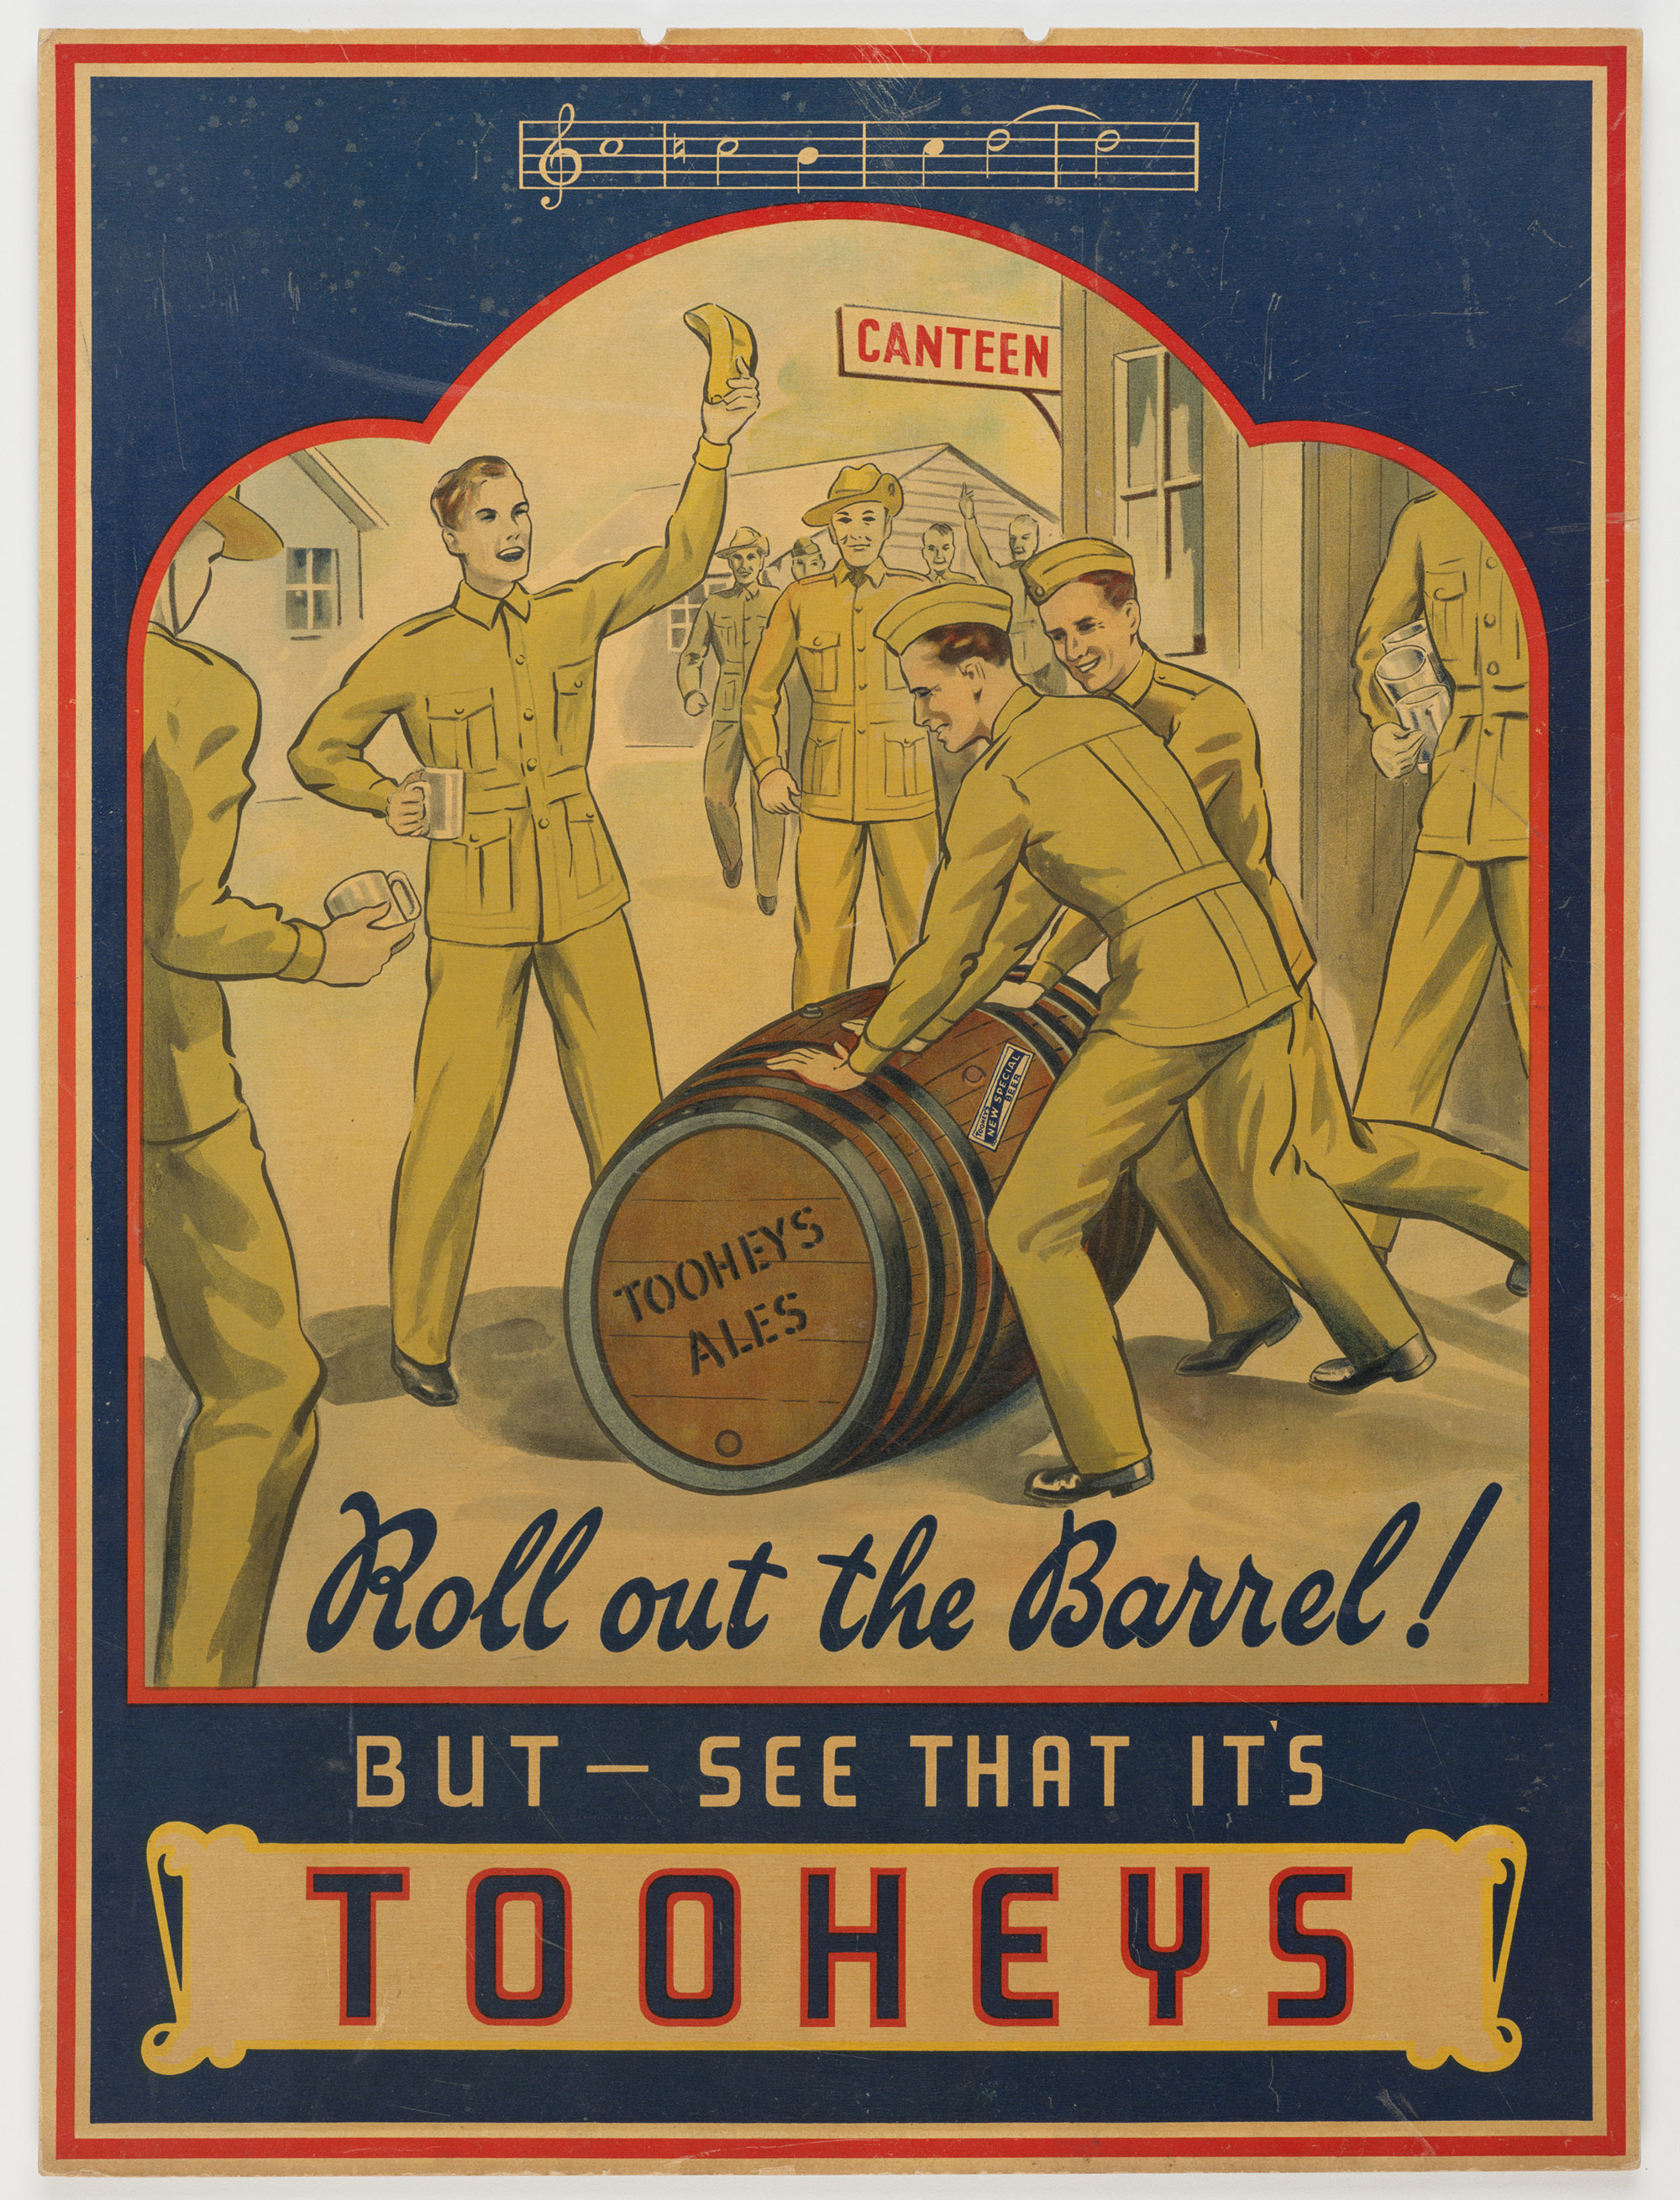 Advertisement poster for Tooheys showing soldiers pushing a barrel. 